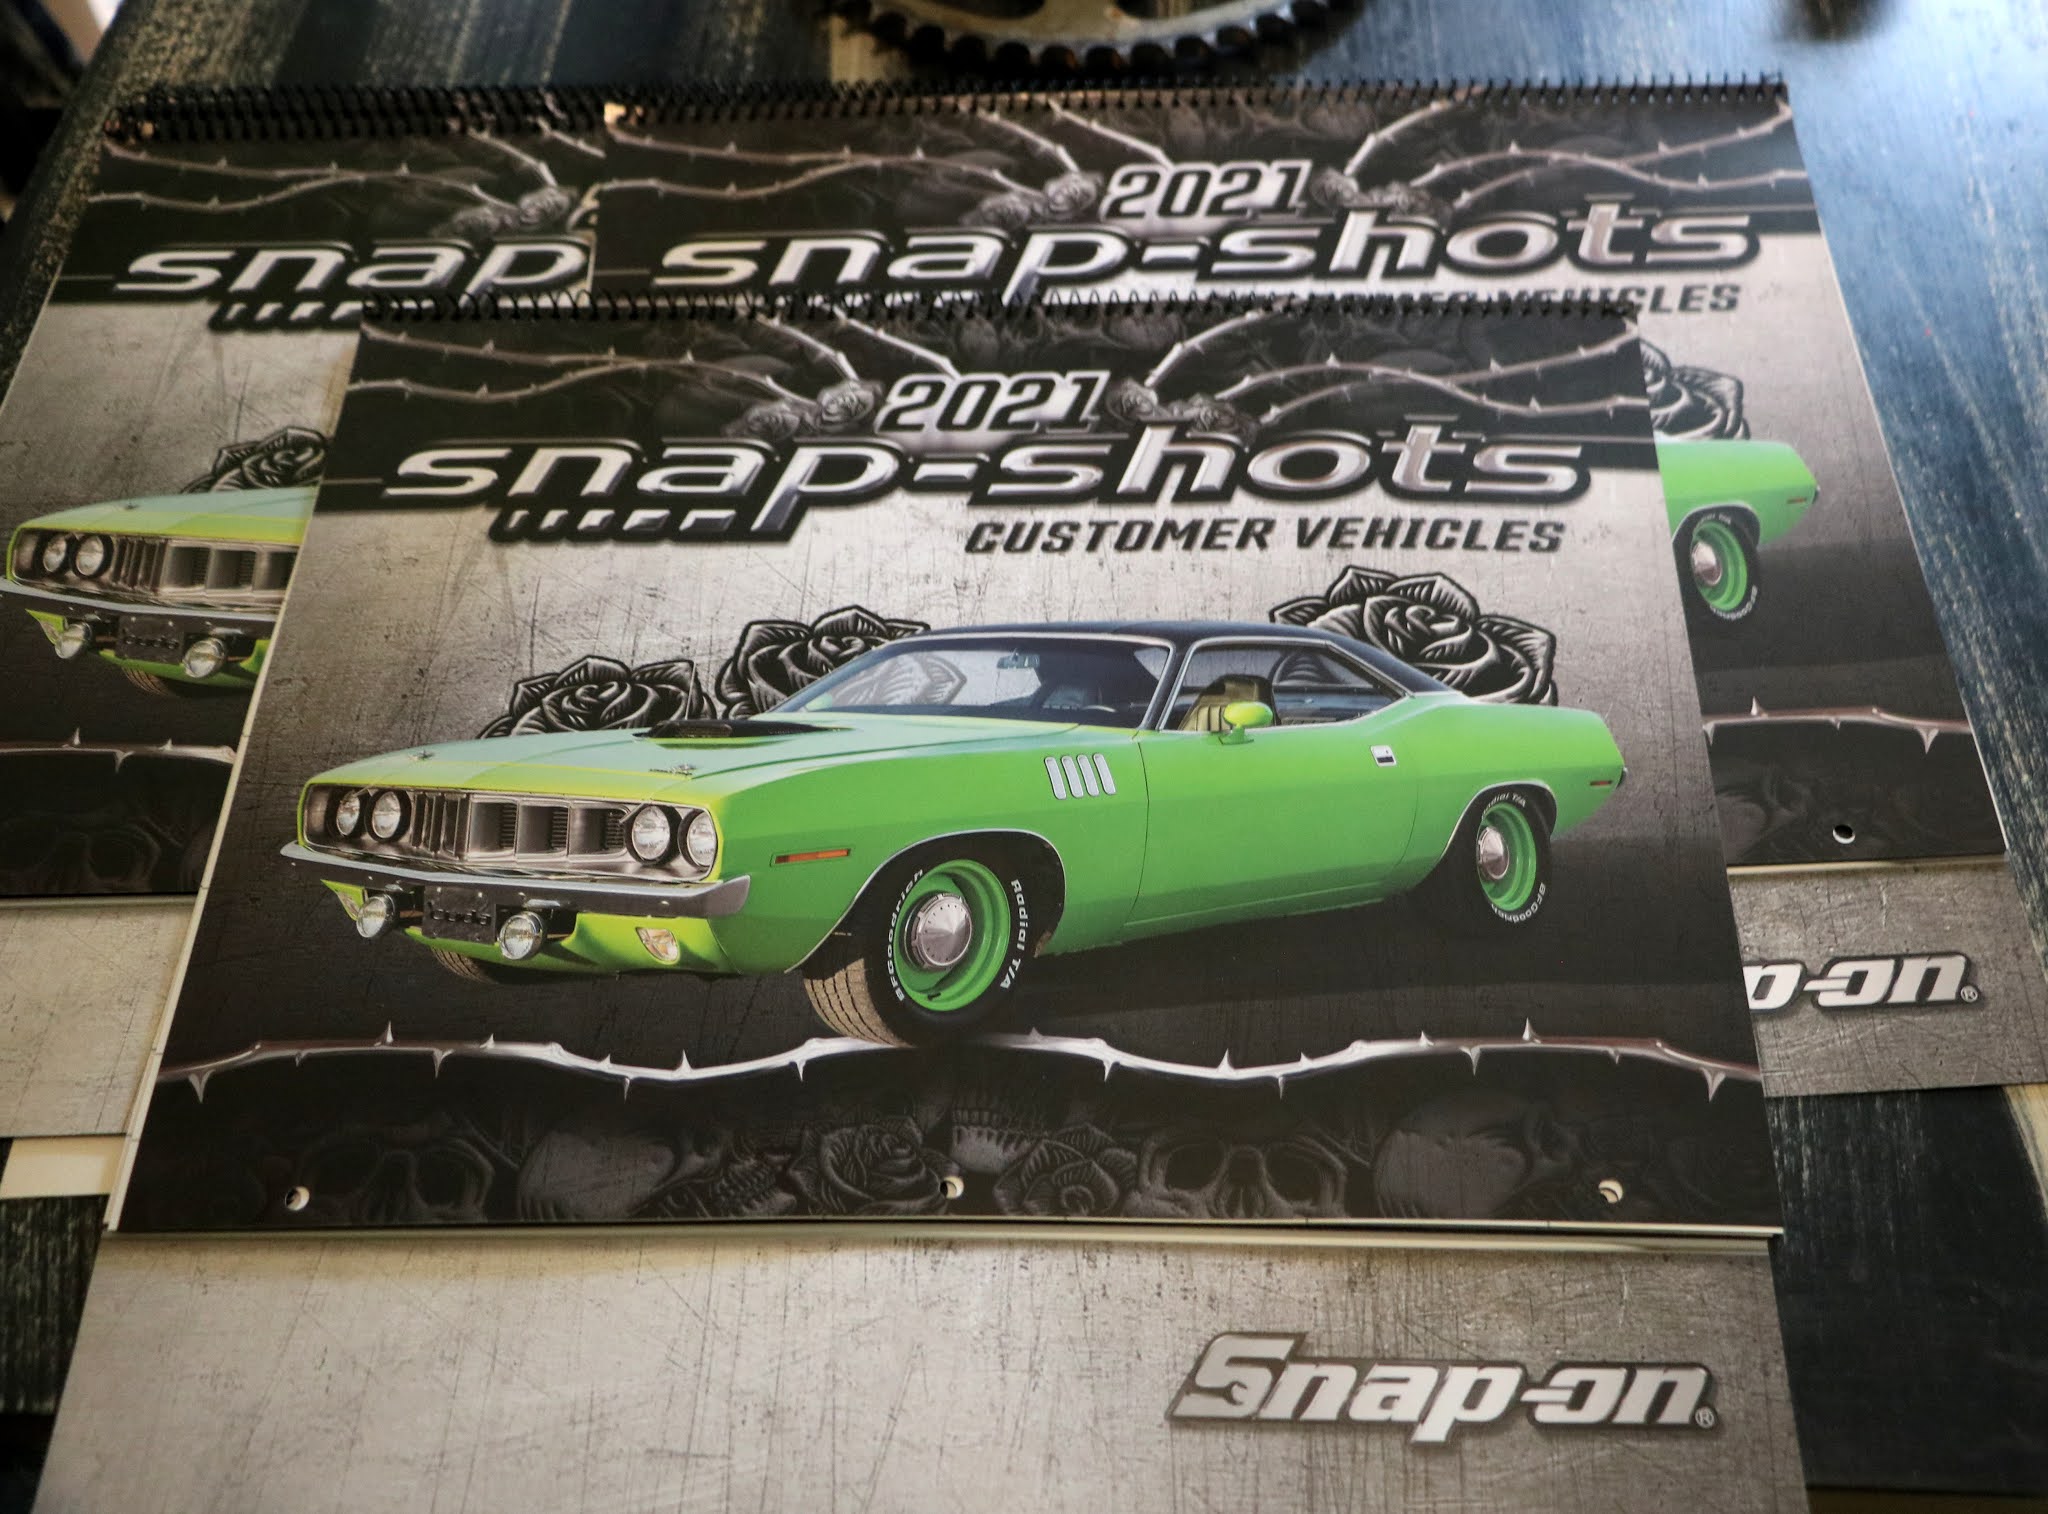 OLD IRON NEVER DIES~~~~~~~~~~~~~~~~~~: 2021 Snap-on calendar is out!